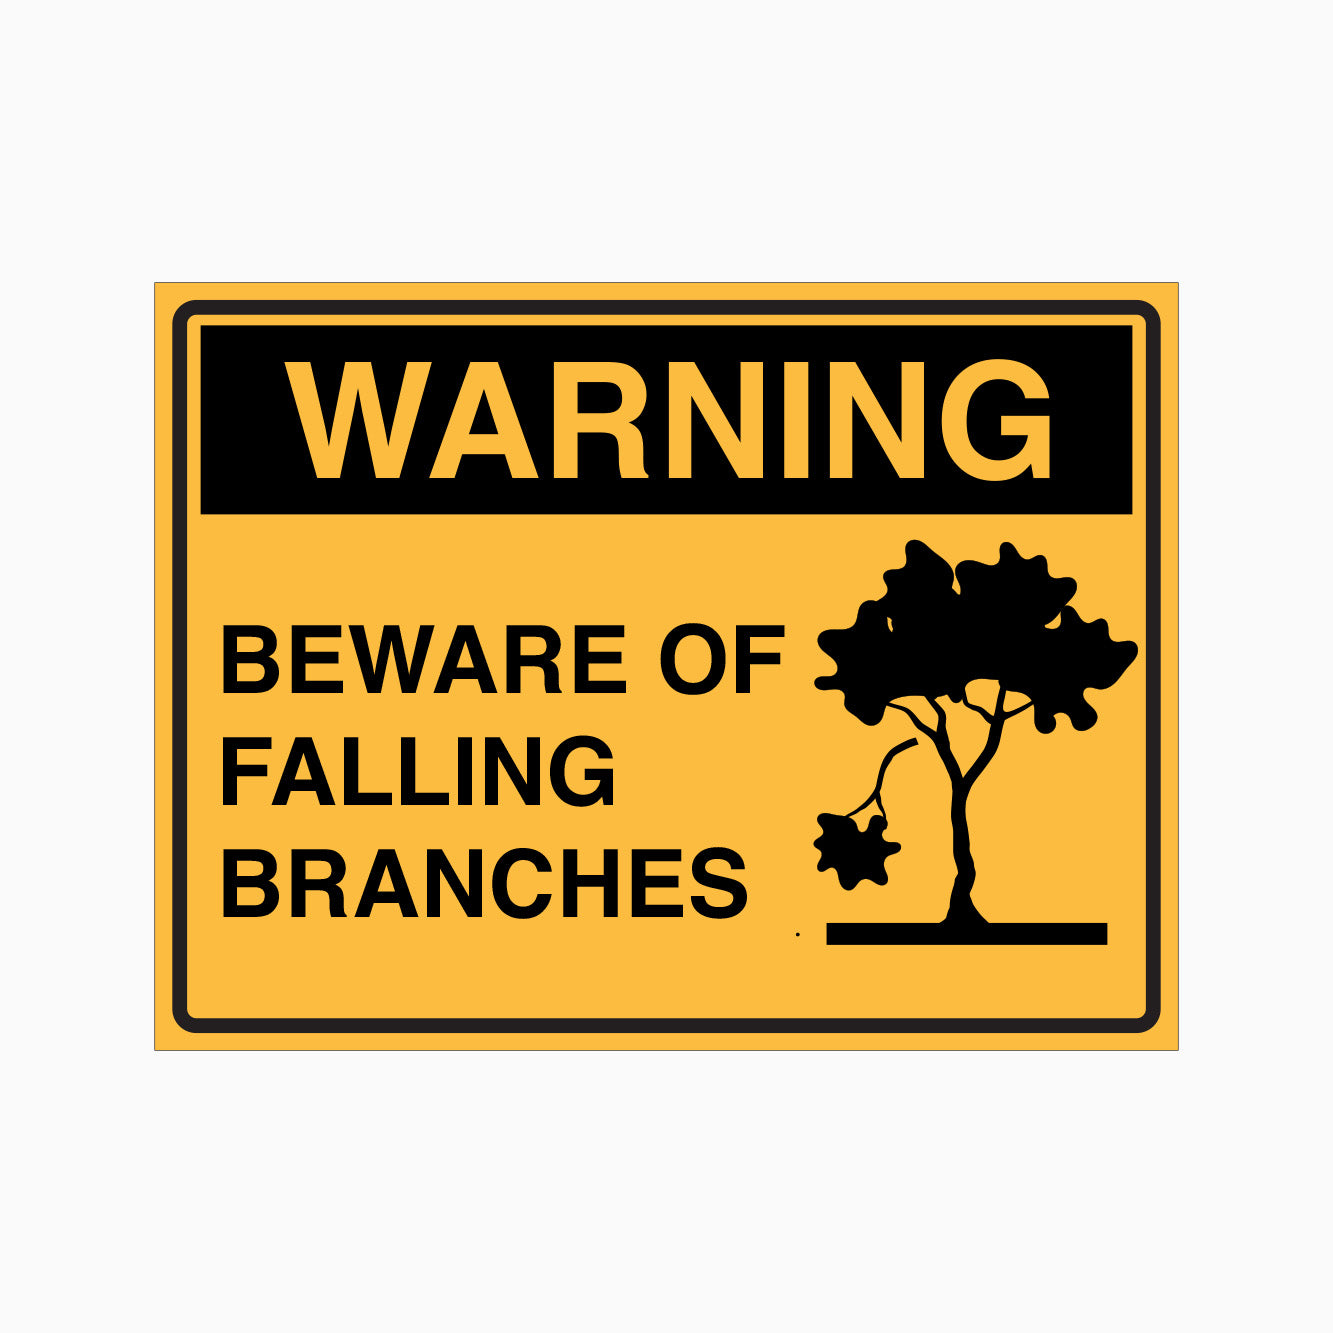 BEWARE OF FALLING BRANCHES SIGN - warning sign